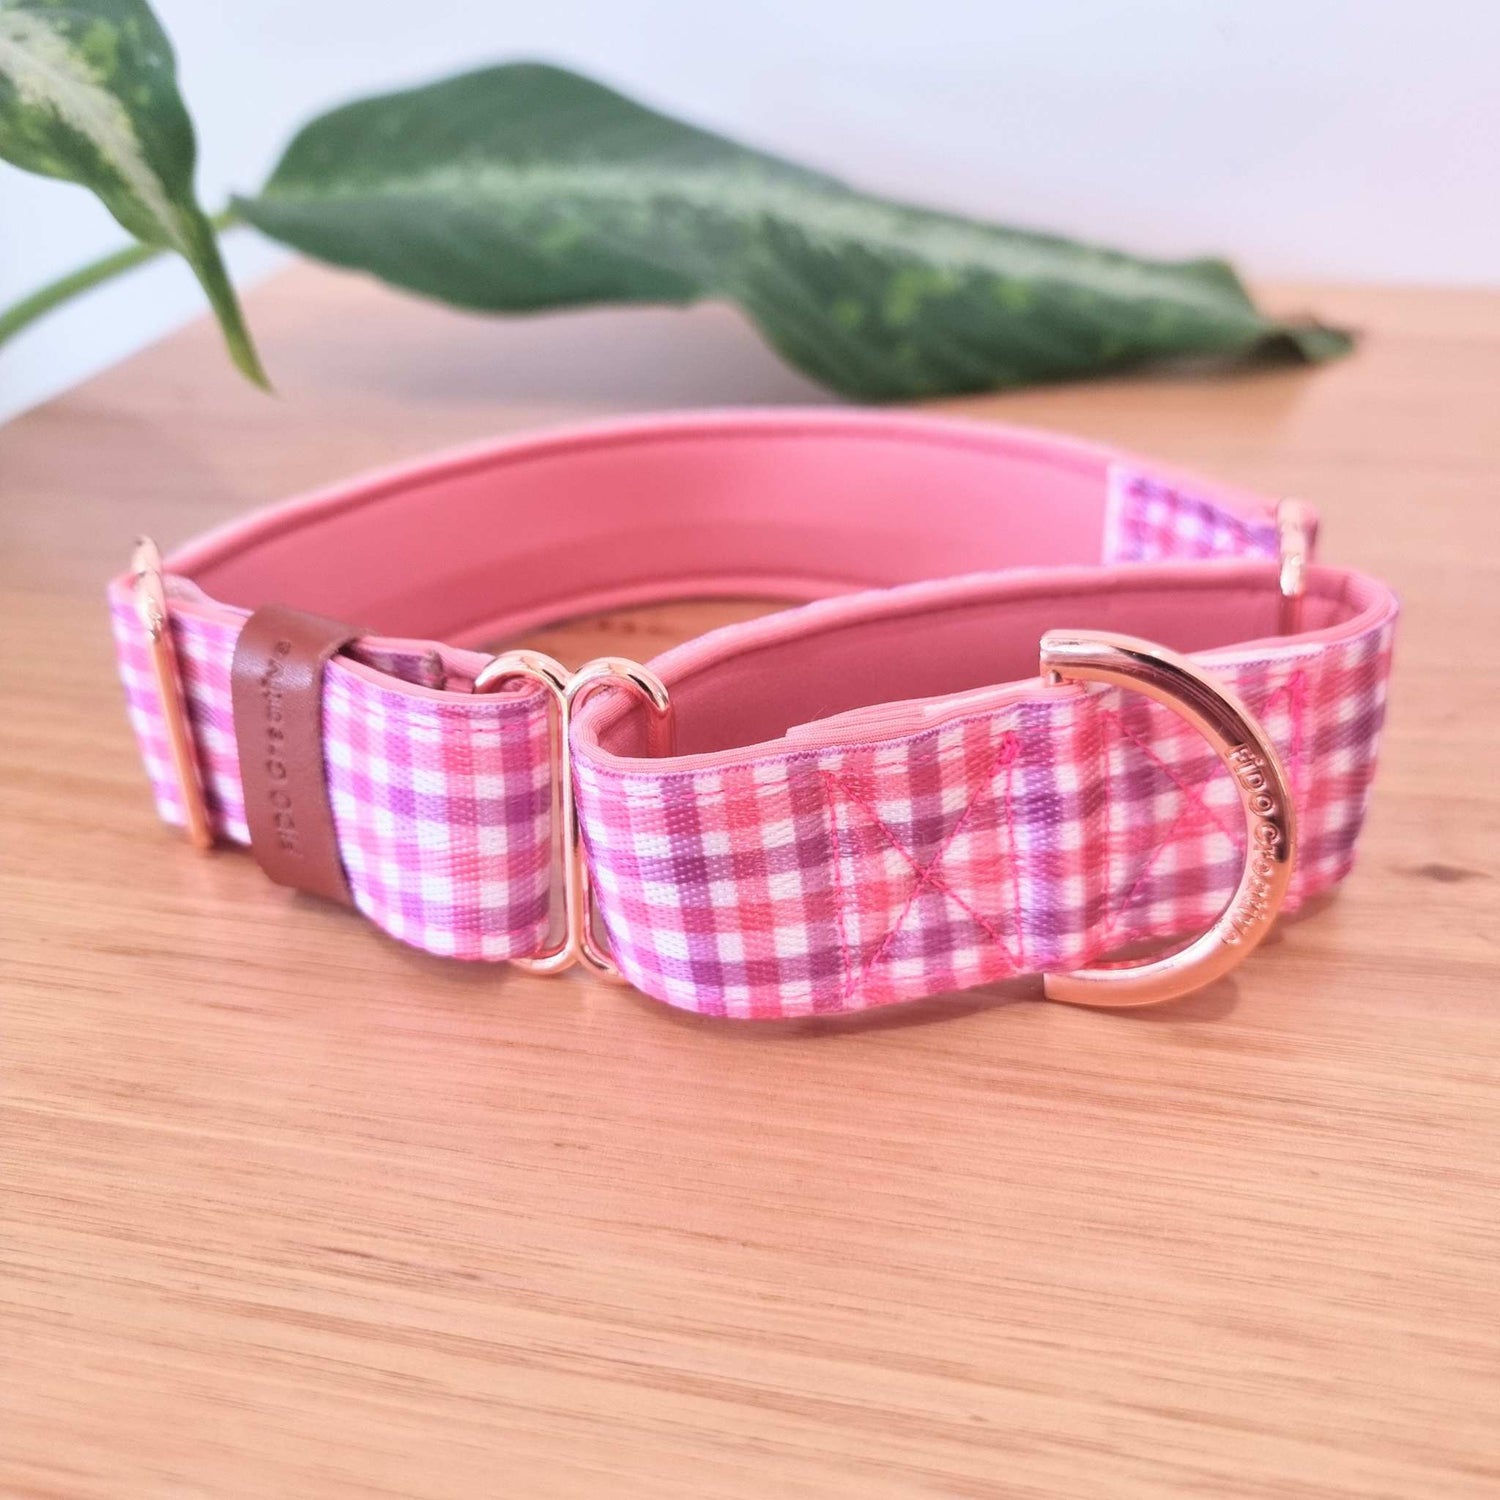 Gingham greyhound collar with name